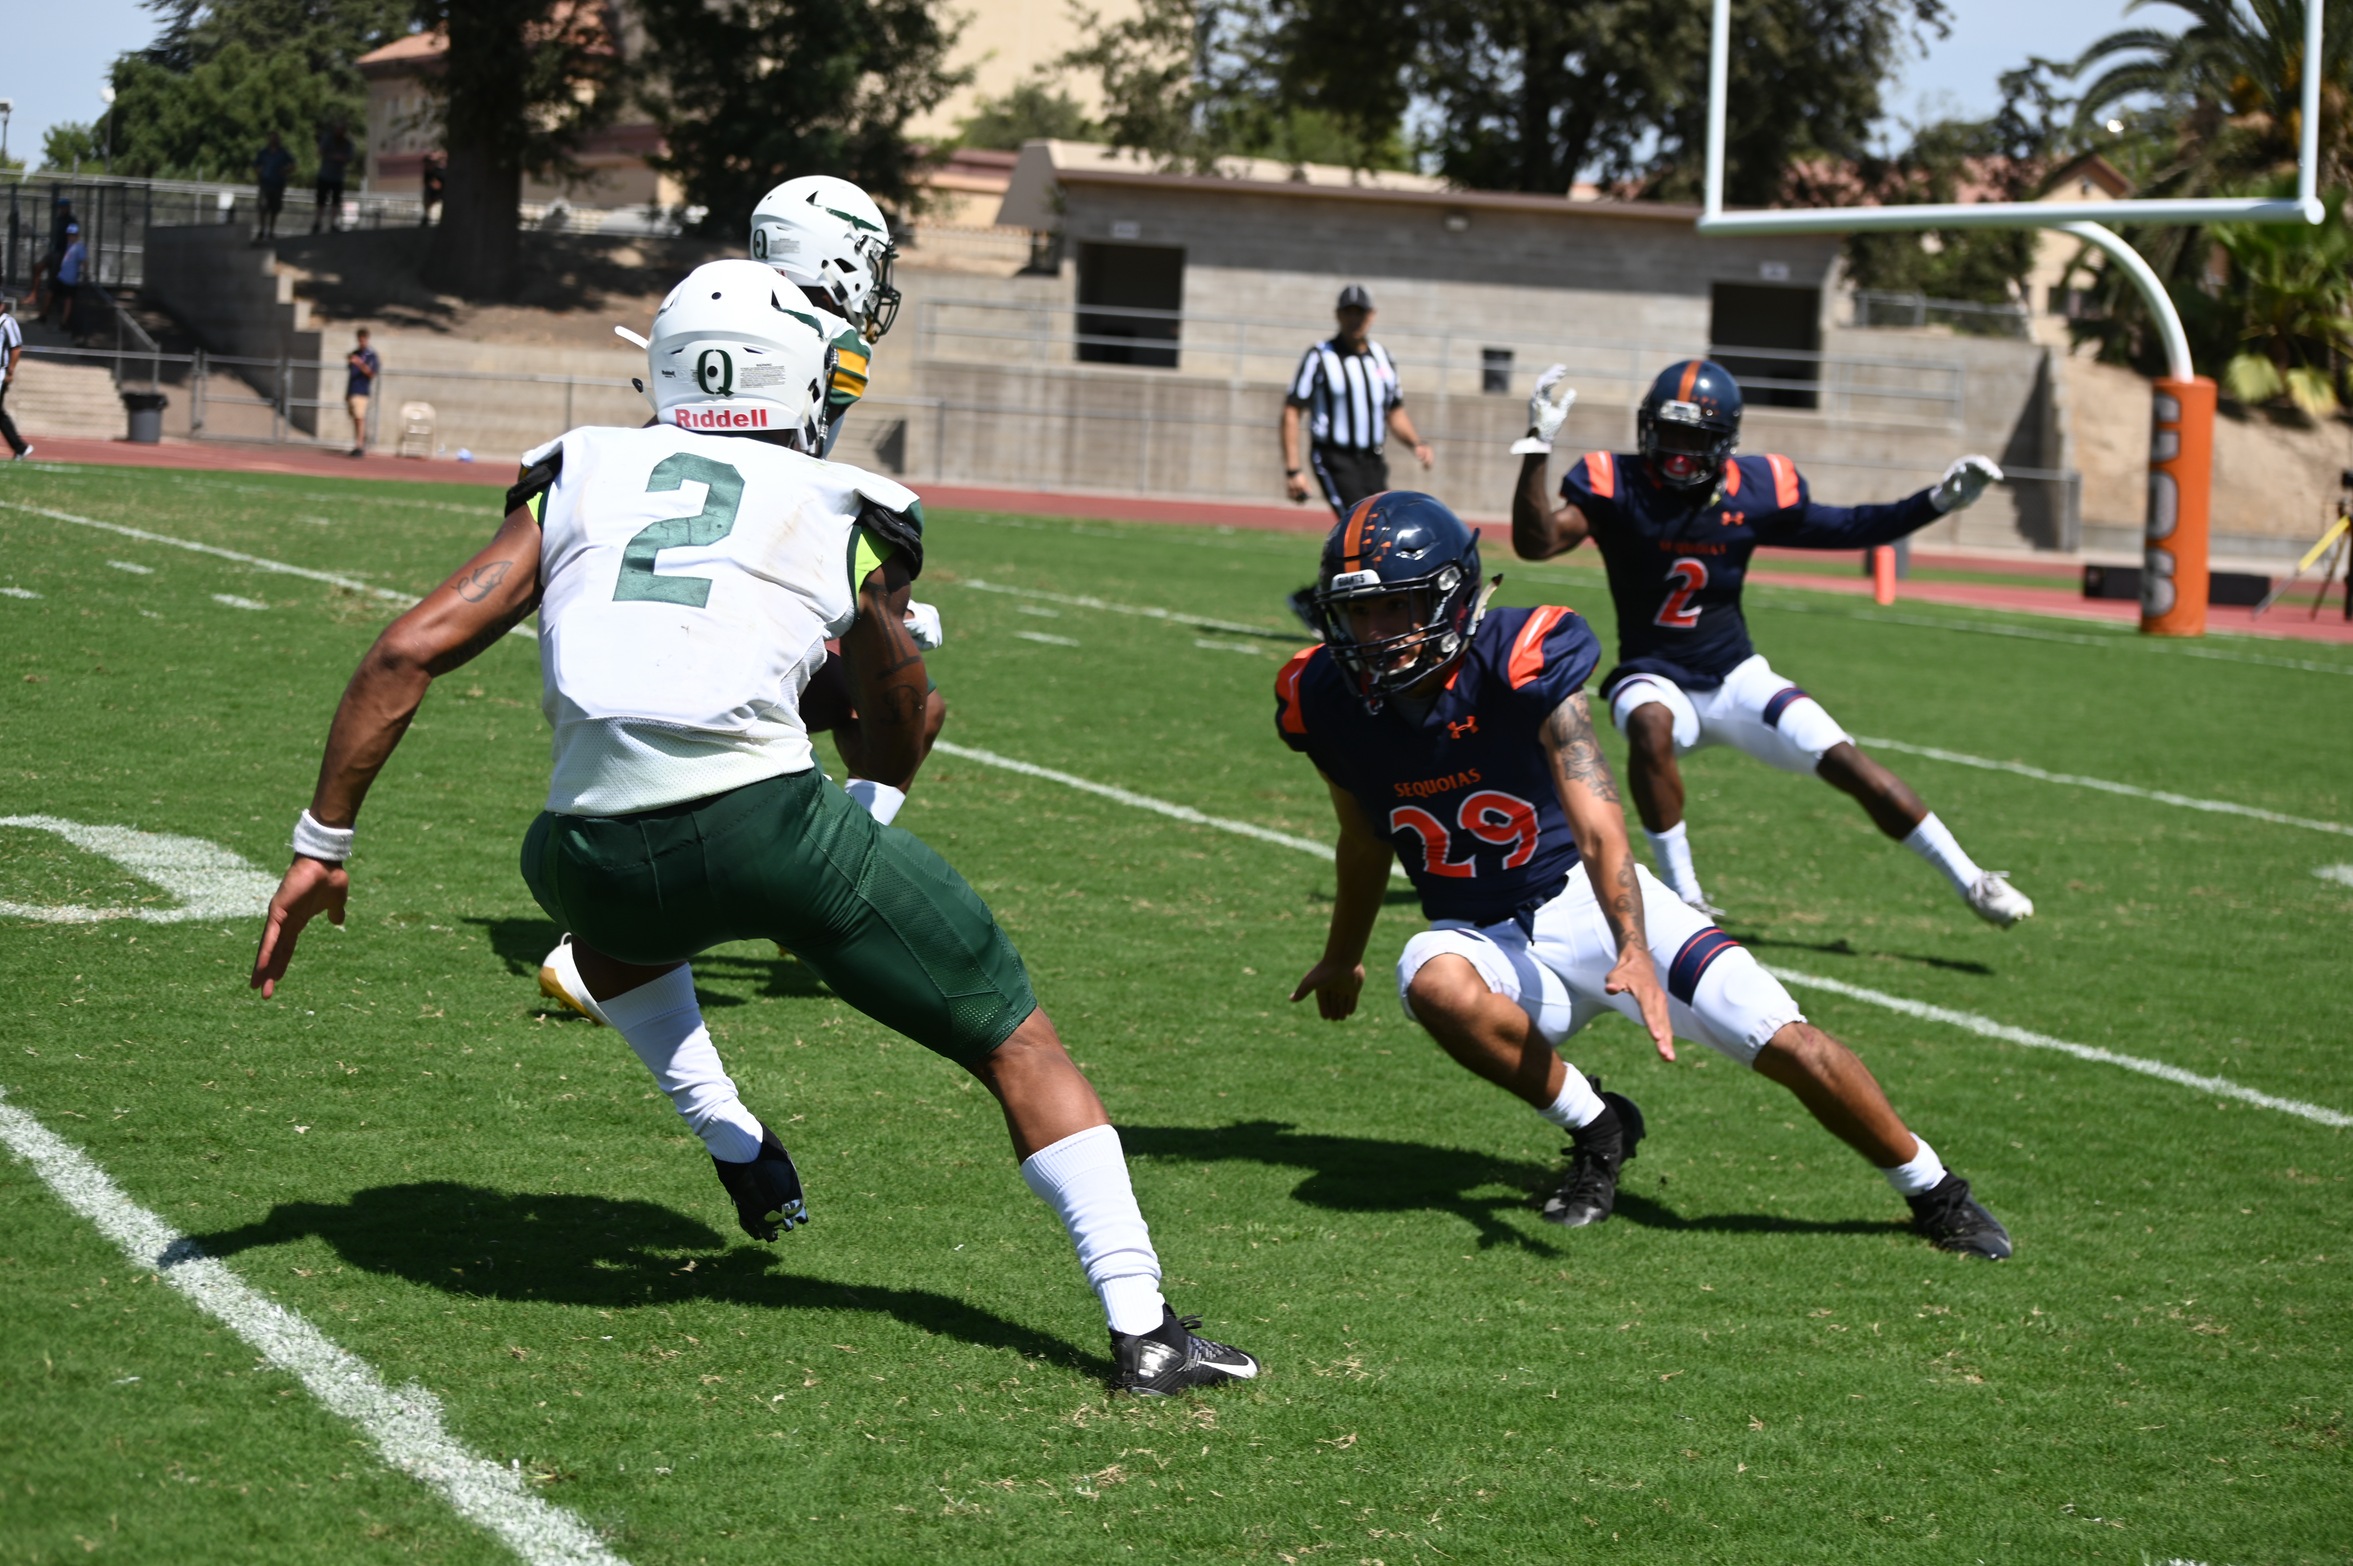 Spring football suits Giants, who open season March 13 at Antelope Valley